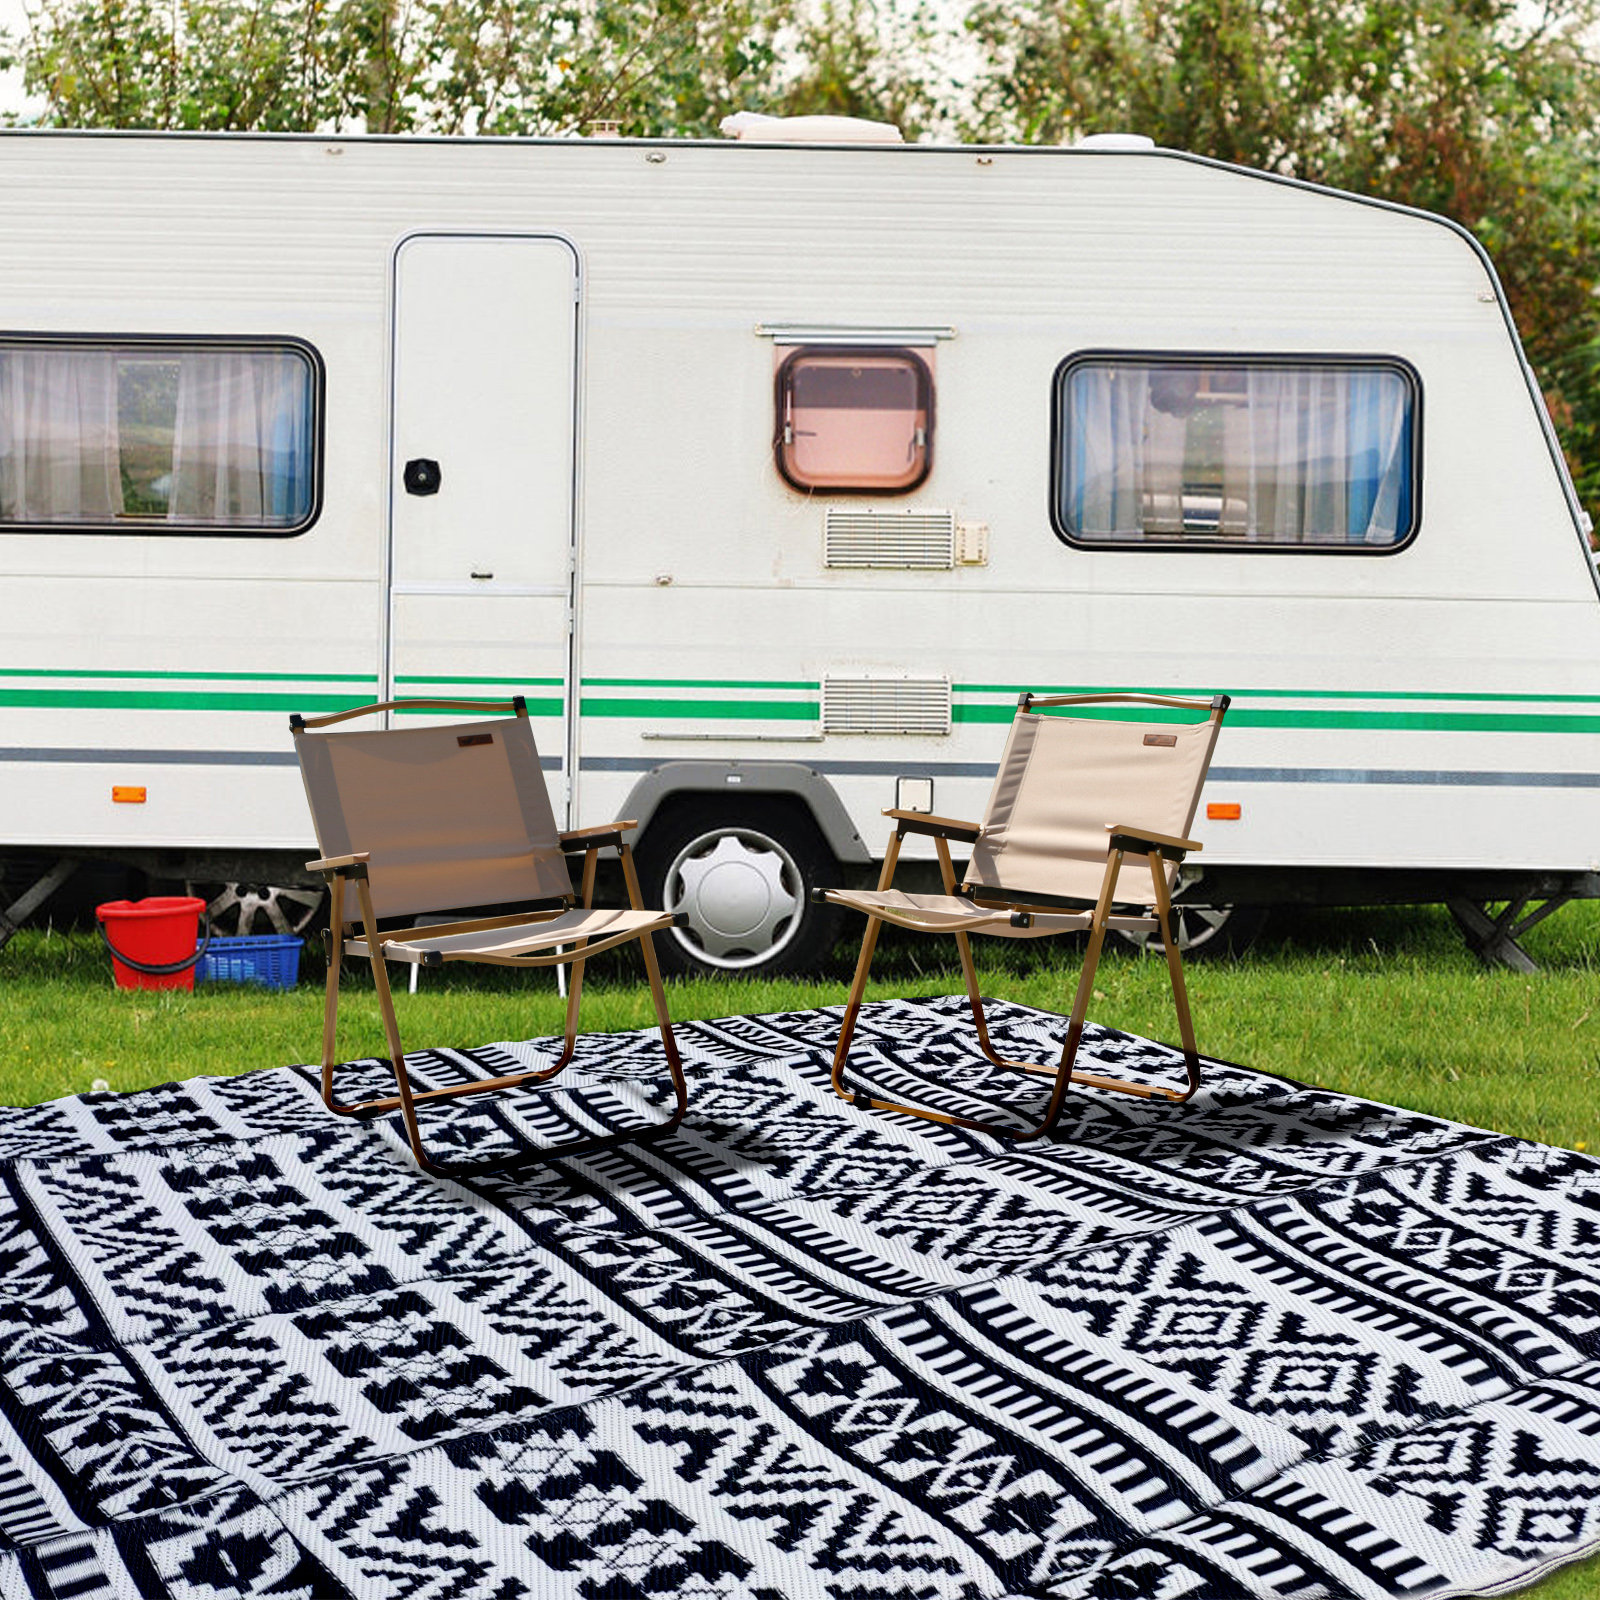 Dakota Fields RV Portable Mat, Recycled Reversible RV Rug, 9x12 FT Large  Floor Mat and Rug for Outdoors